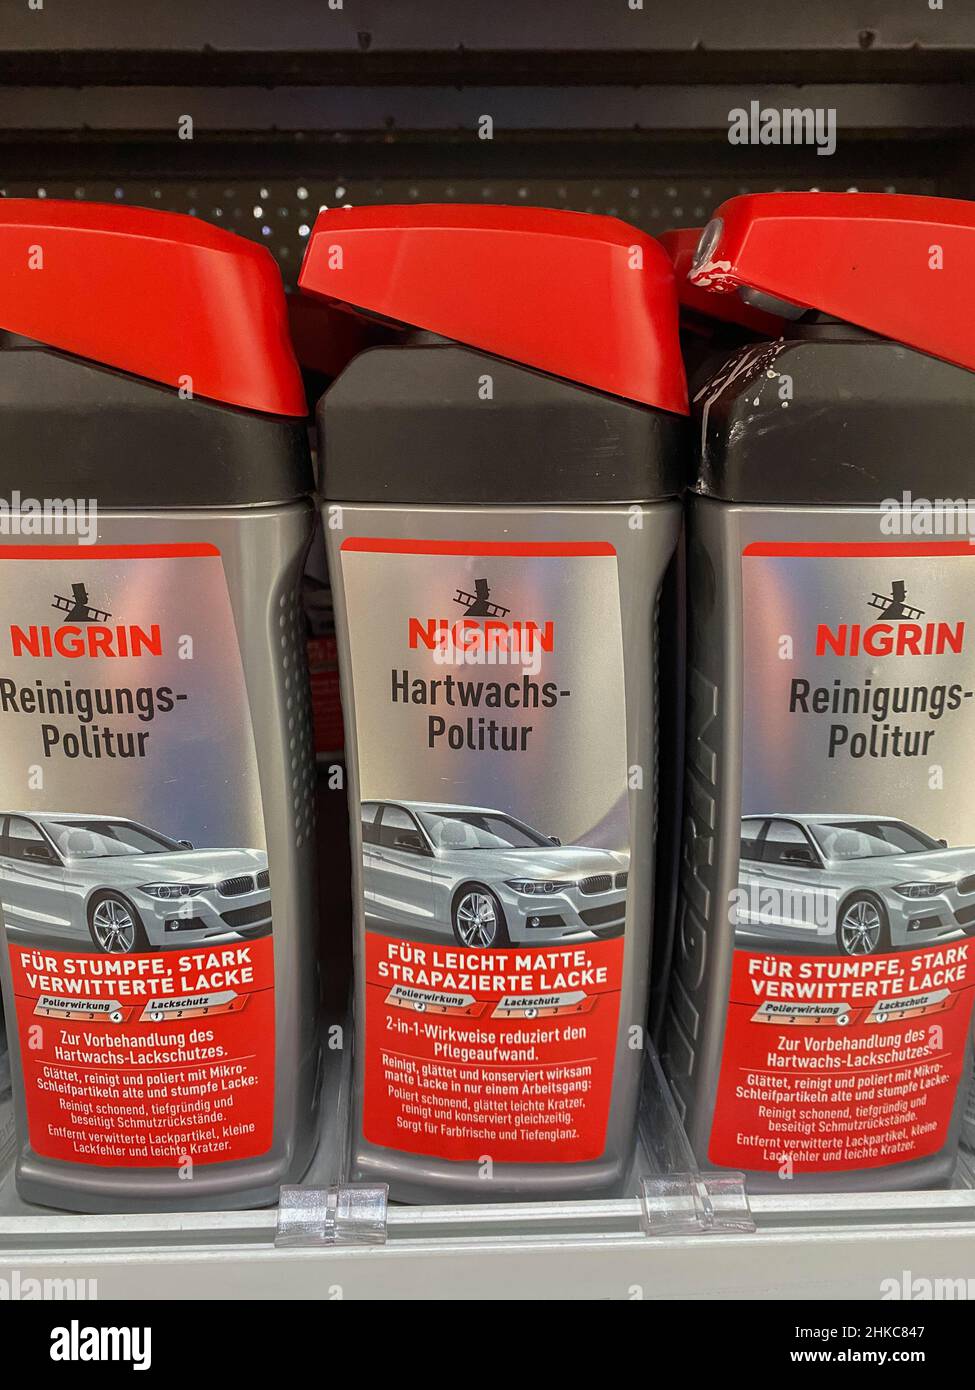 https://c8.alamy.com/comp/2HKC847/rheinbach-germany-17-march-2021-several-packages-of-nigrin-polish-for-the-car-on-the-shelf-of-a-german-hardware-store-2HKC847.jpg